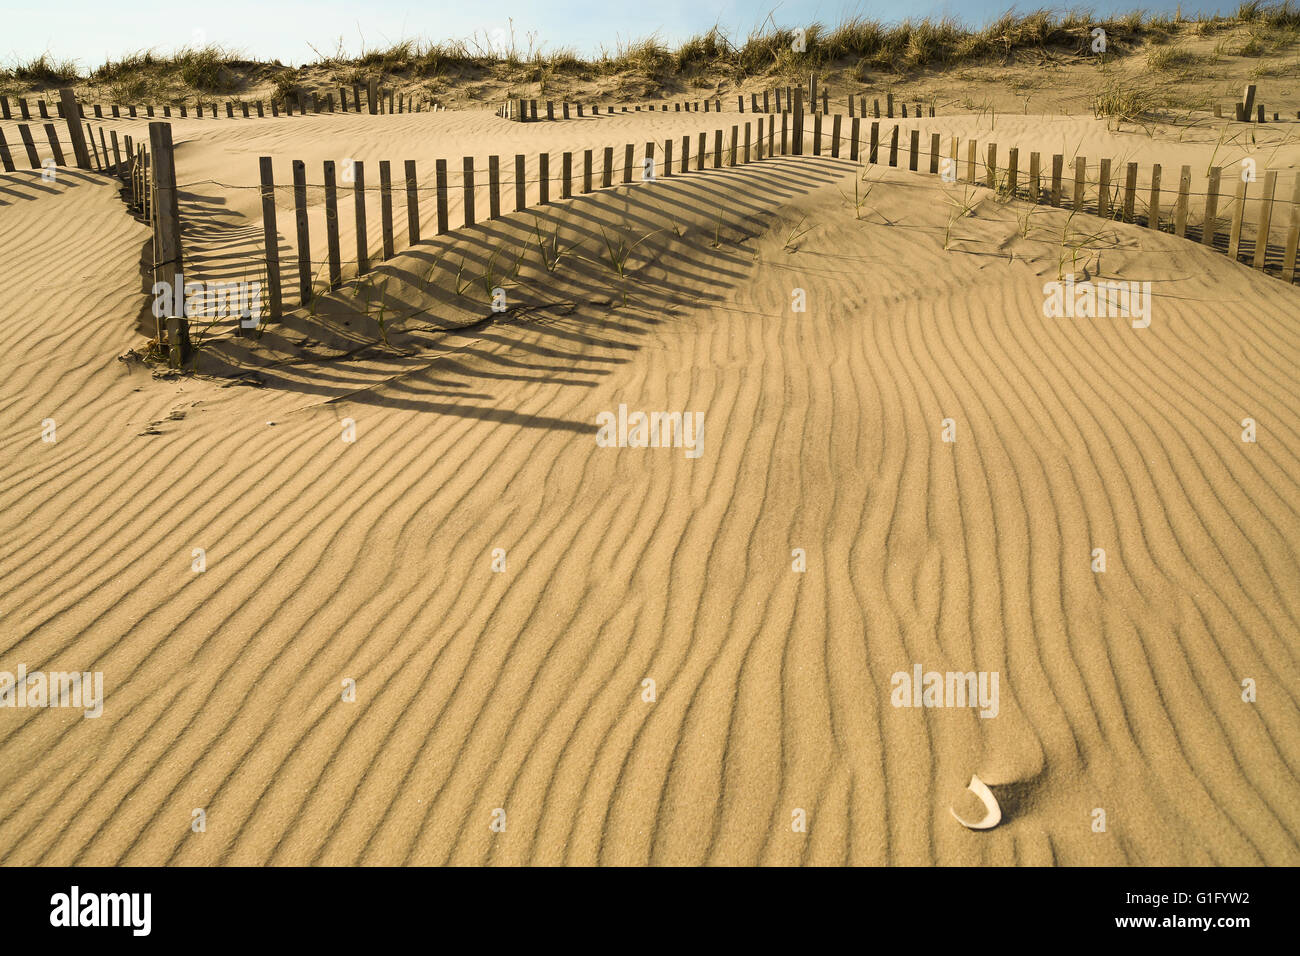 View of a portion of ocean beach with dunes, beach fencing and beach grass Stock Photo